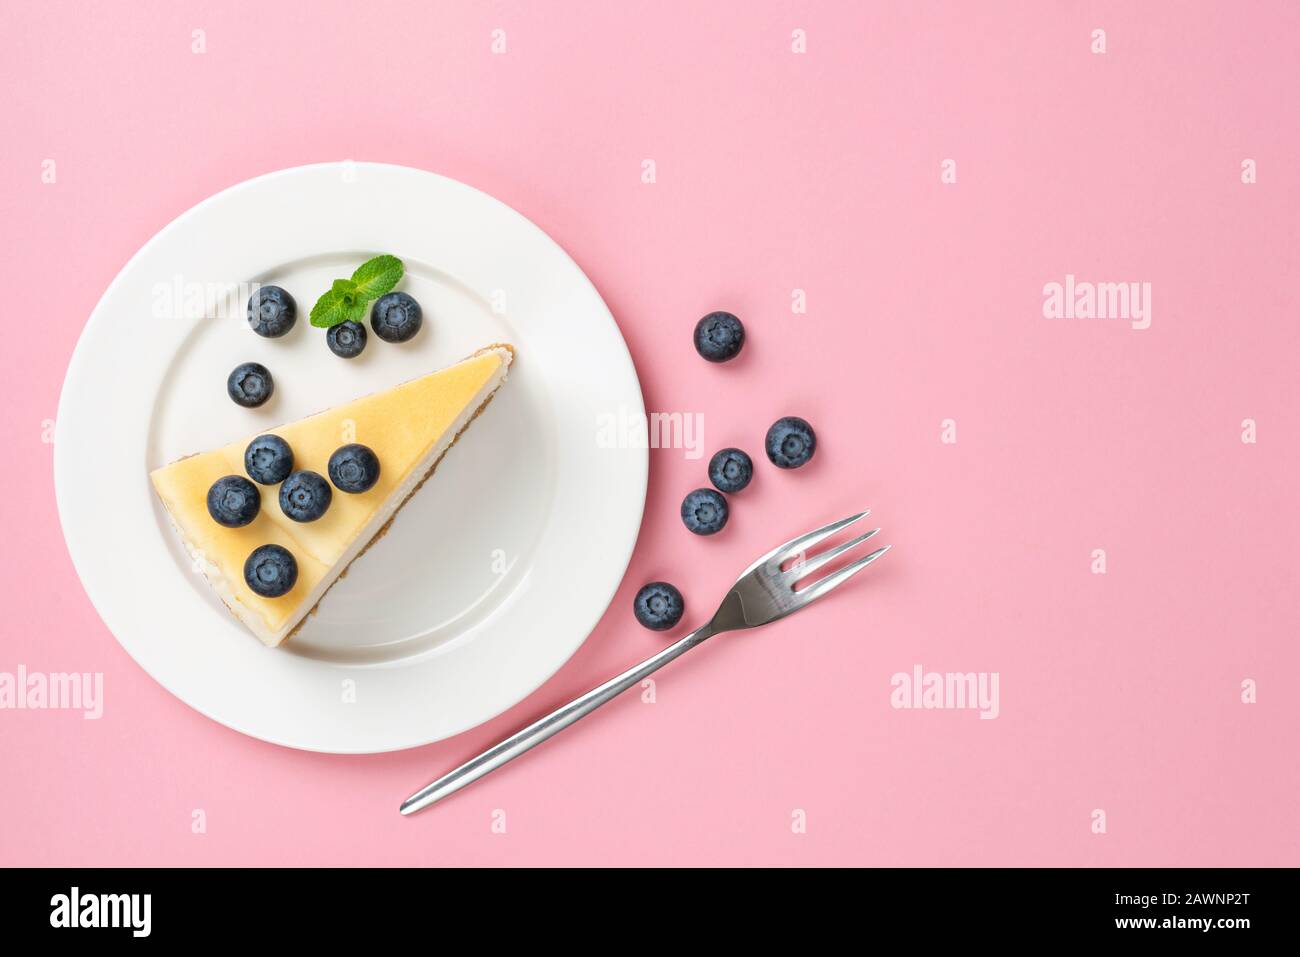 Cheesecake Slice On Plate With Blueberries, Top view, Pink Background. Trendy Fashion Dessert Stock Photo